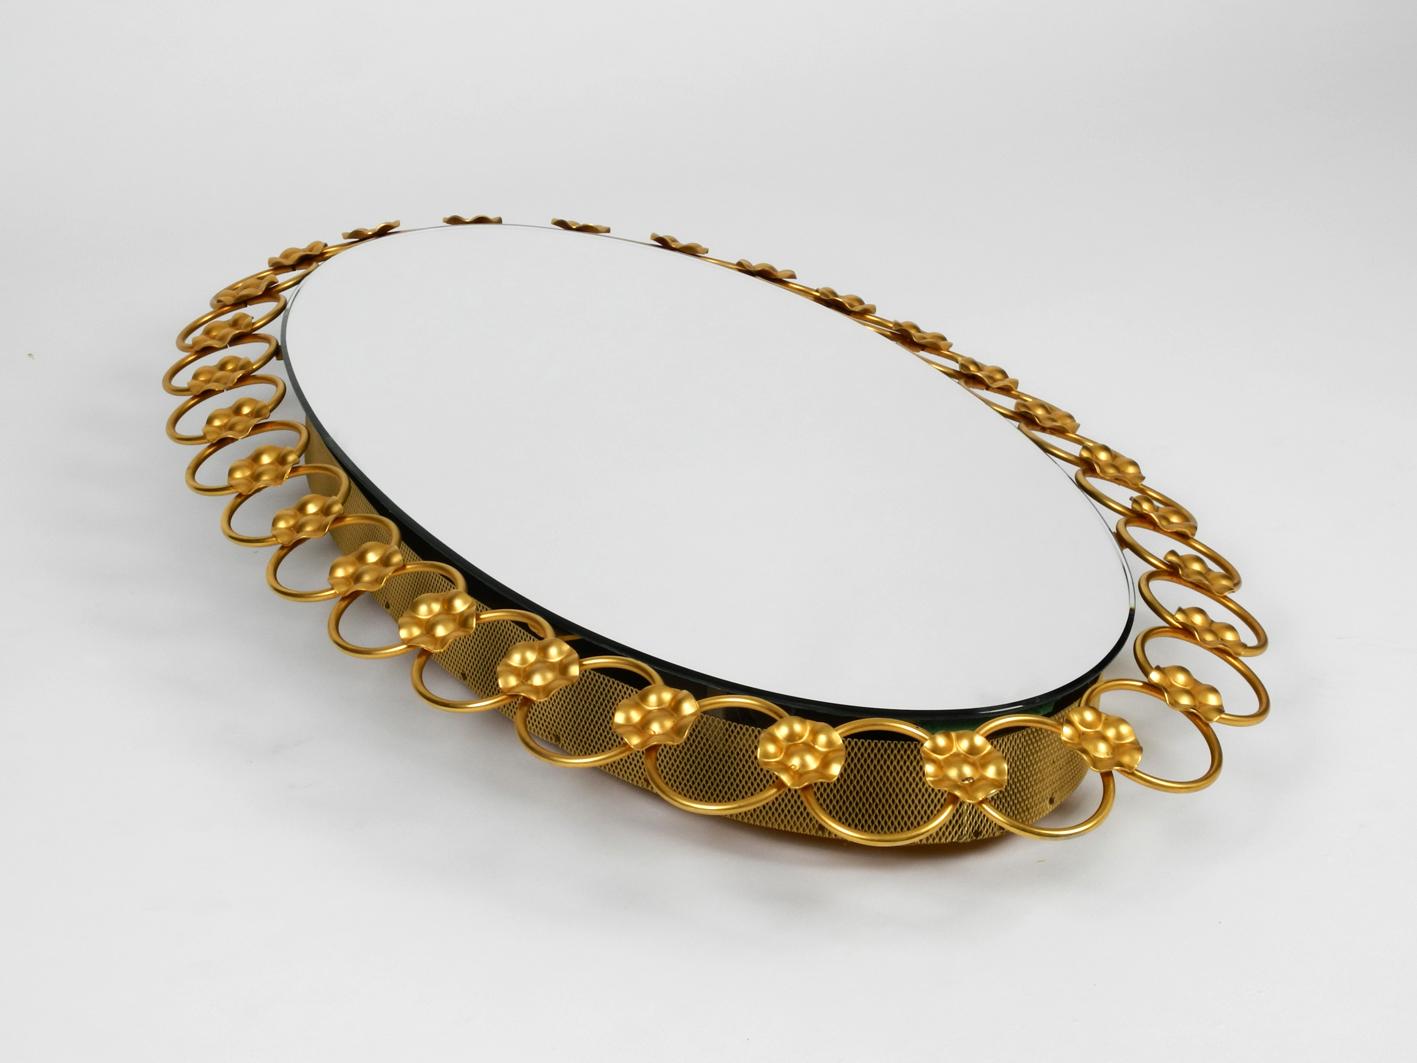 Illuminated Oval 1960s Large Wall Mirror with a Brass Frame In Good Condition For Sale In München, DE